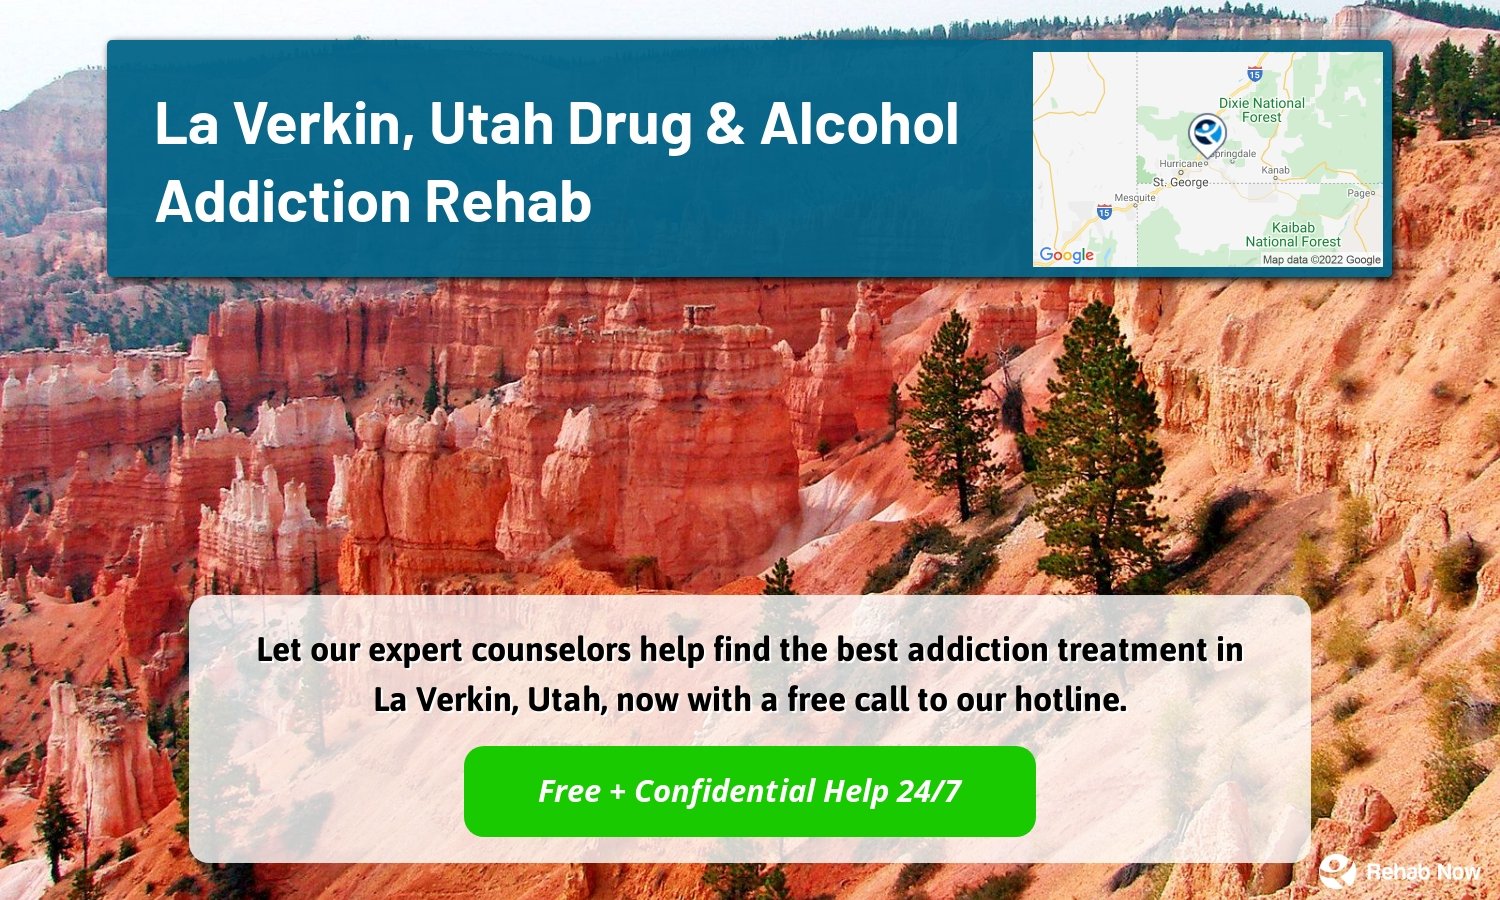 Let our expert counselors help find the best addiction treatment in La Verkin, Utah, now with a free call to our hotline.